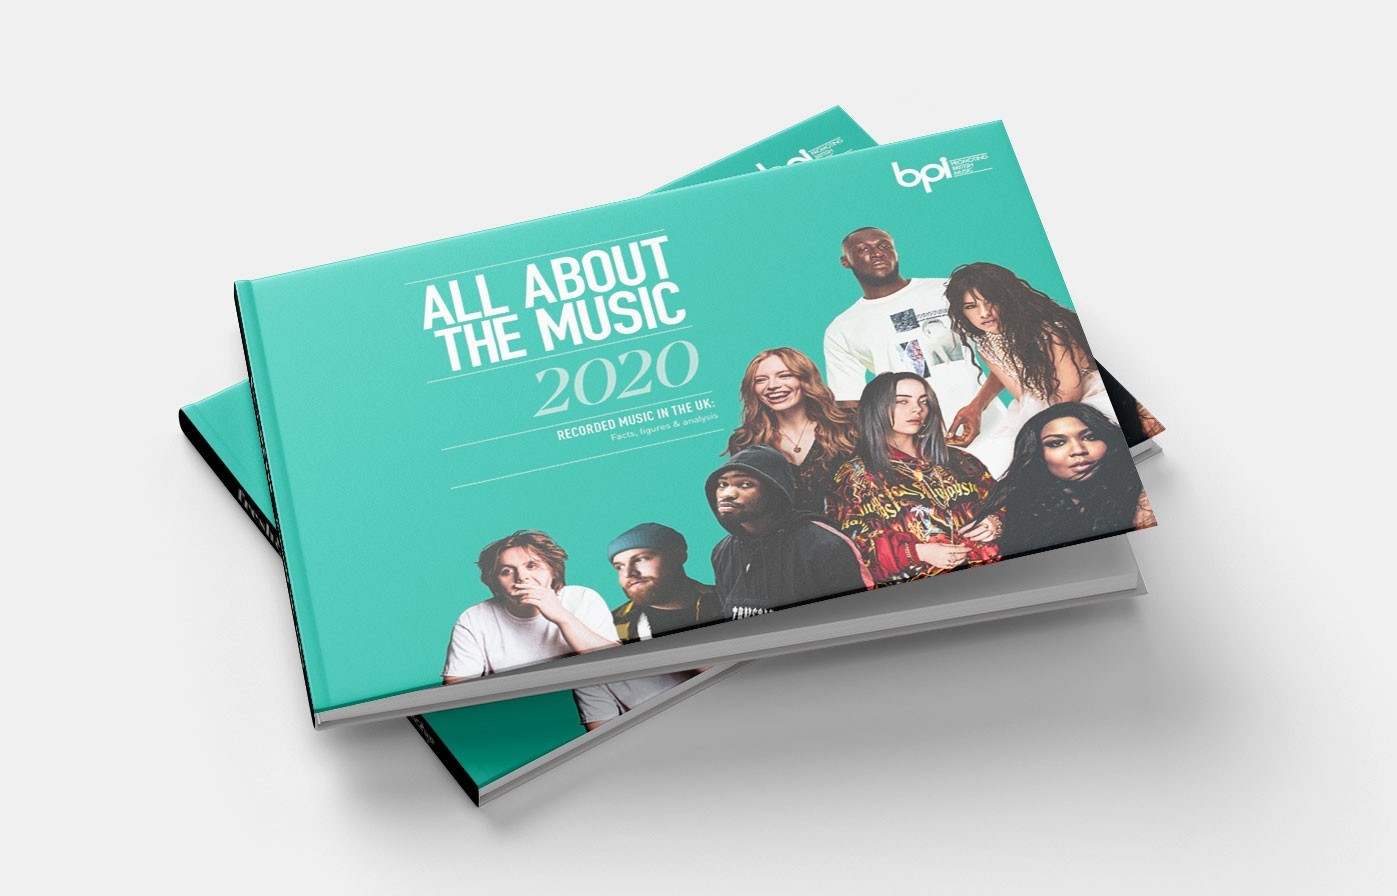 bpi-all-about_music-2020-icmp